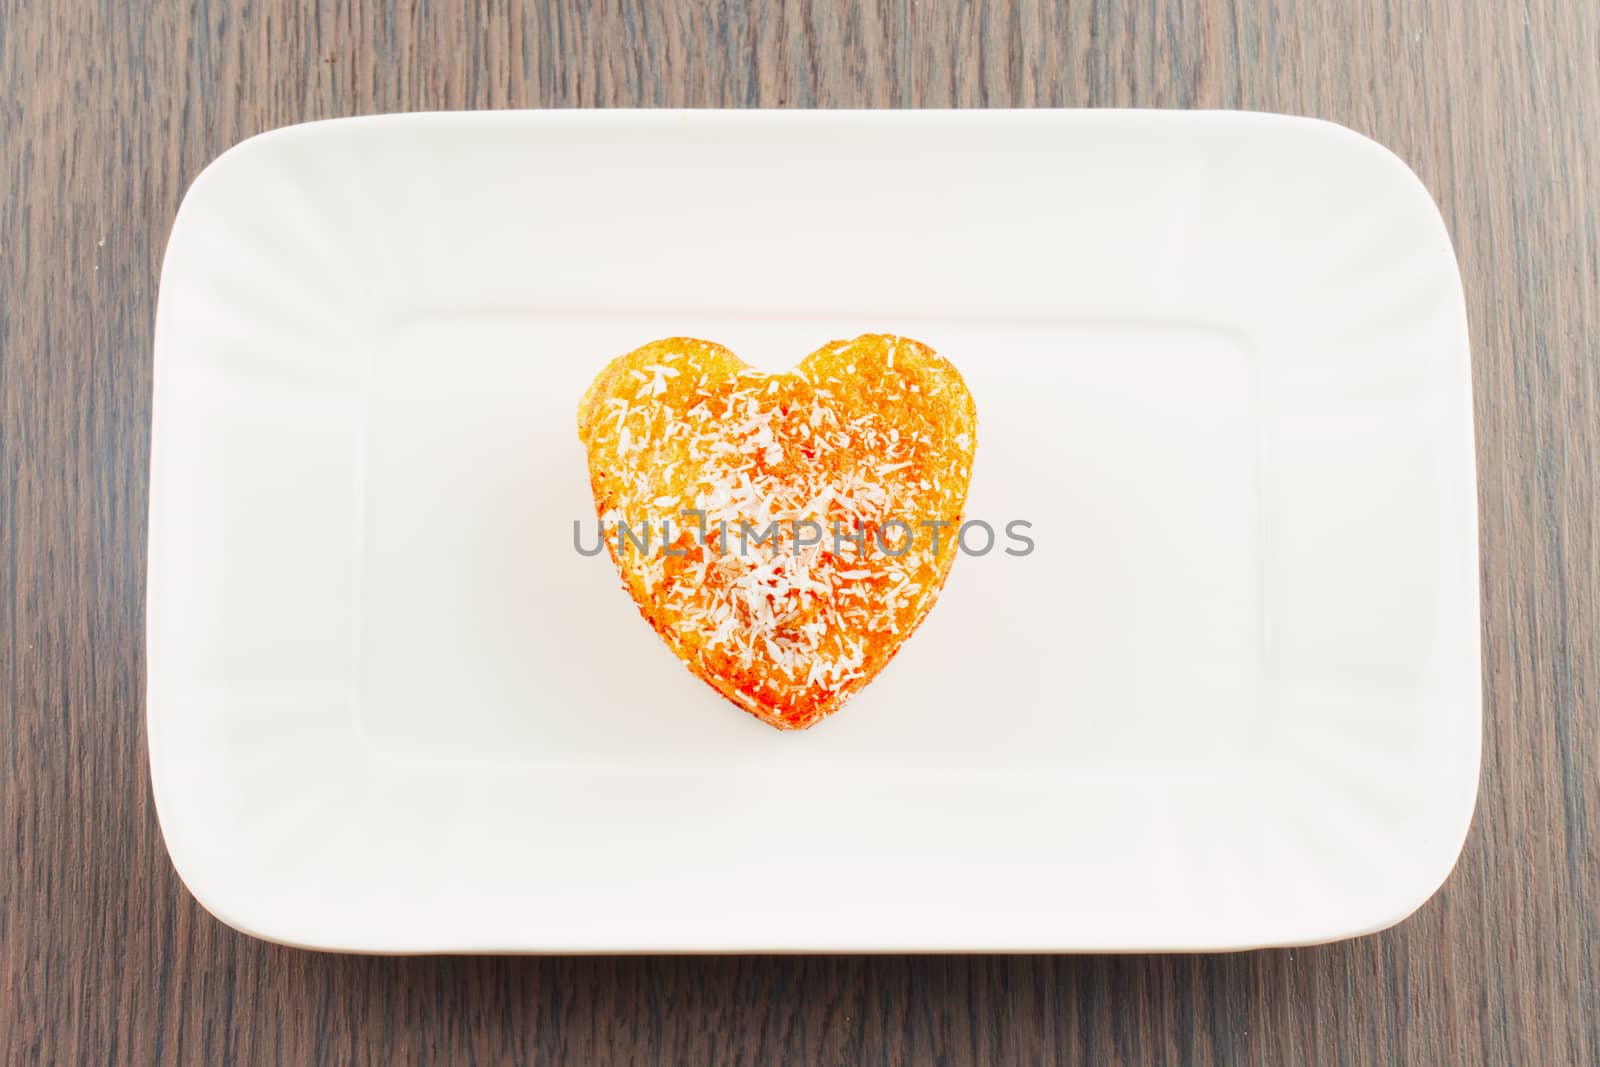 Biscuit in shape of heart over white plate